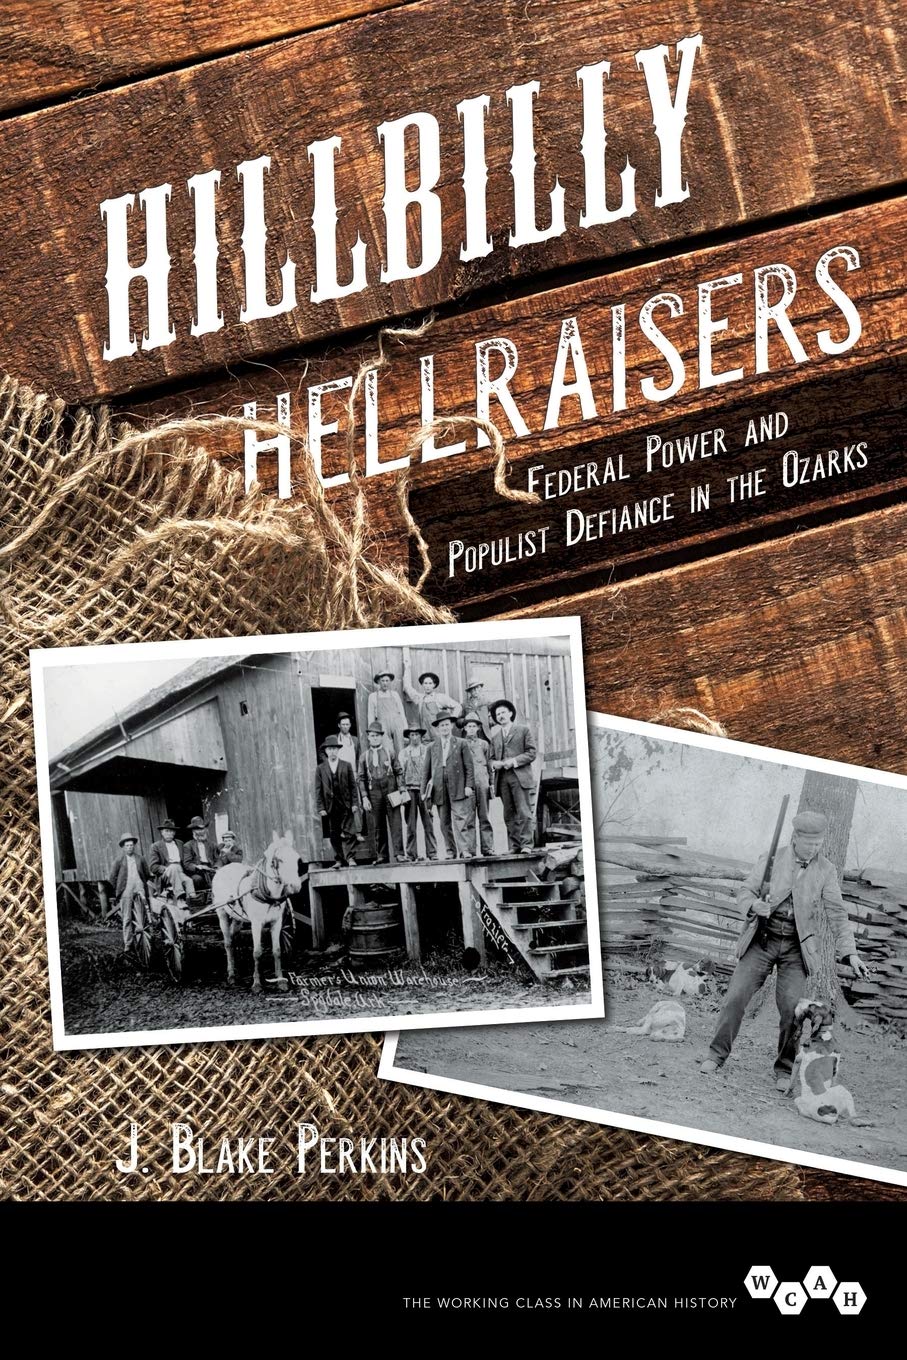 Hillbilly Hellraisers Federal Power And Populist Defiance In The